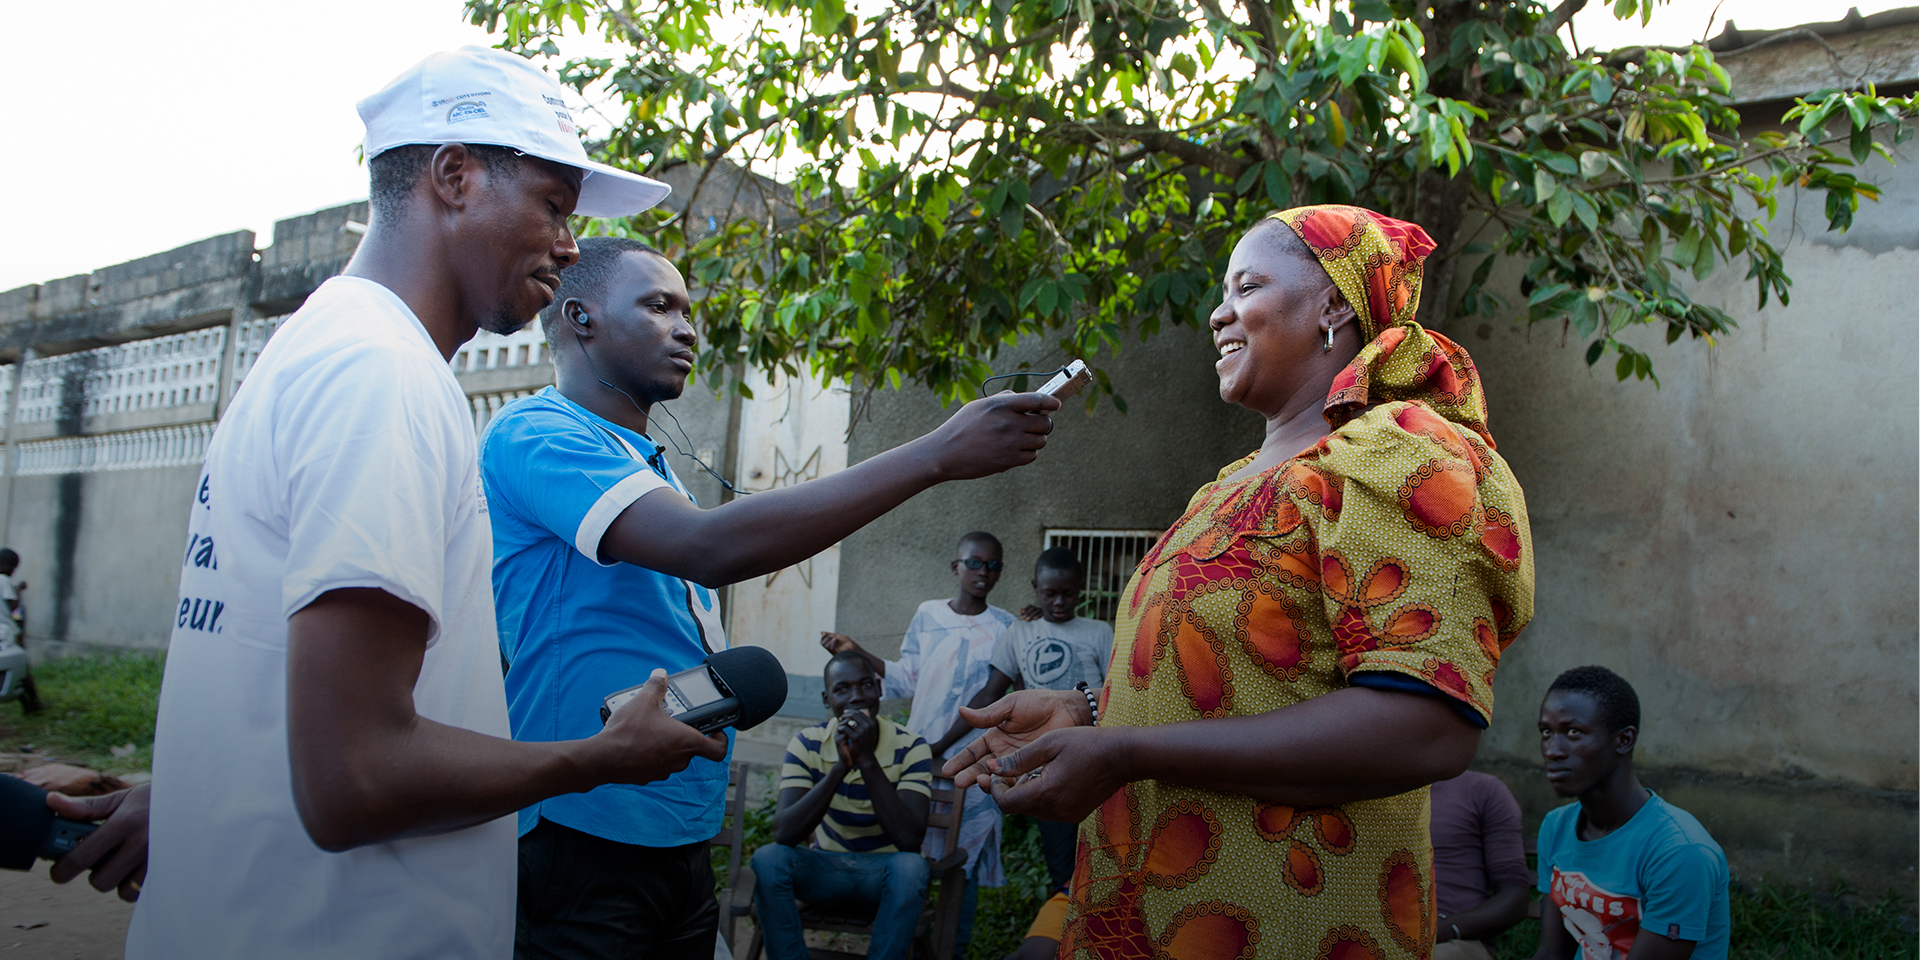 Image of two young men with recorders interviewing a smiling woman on the street.